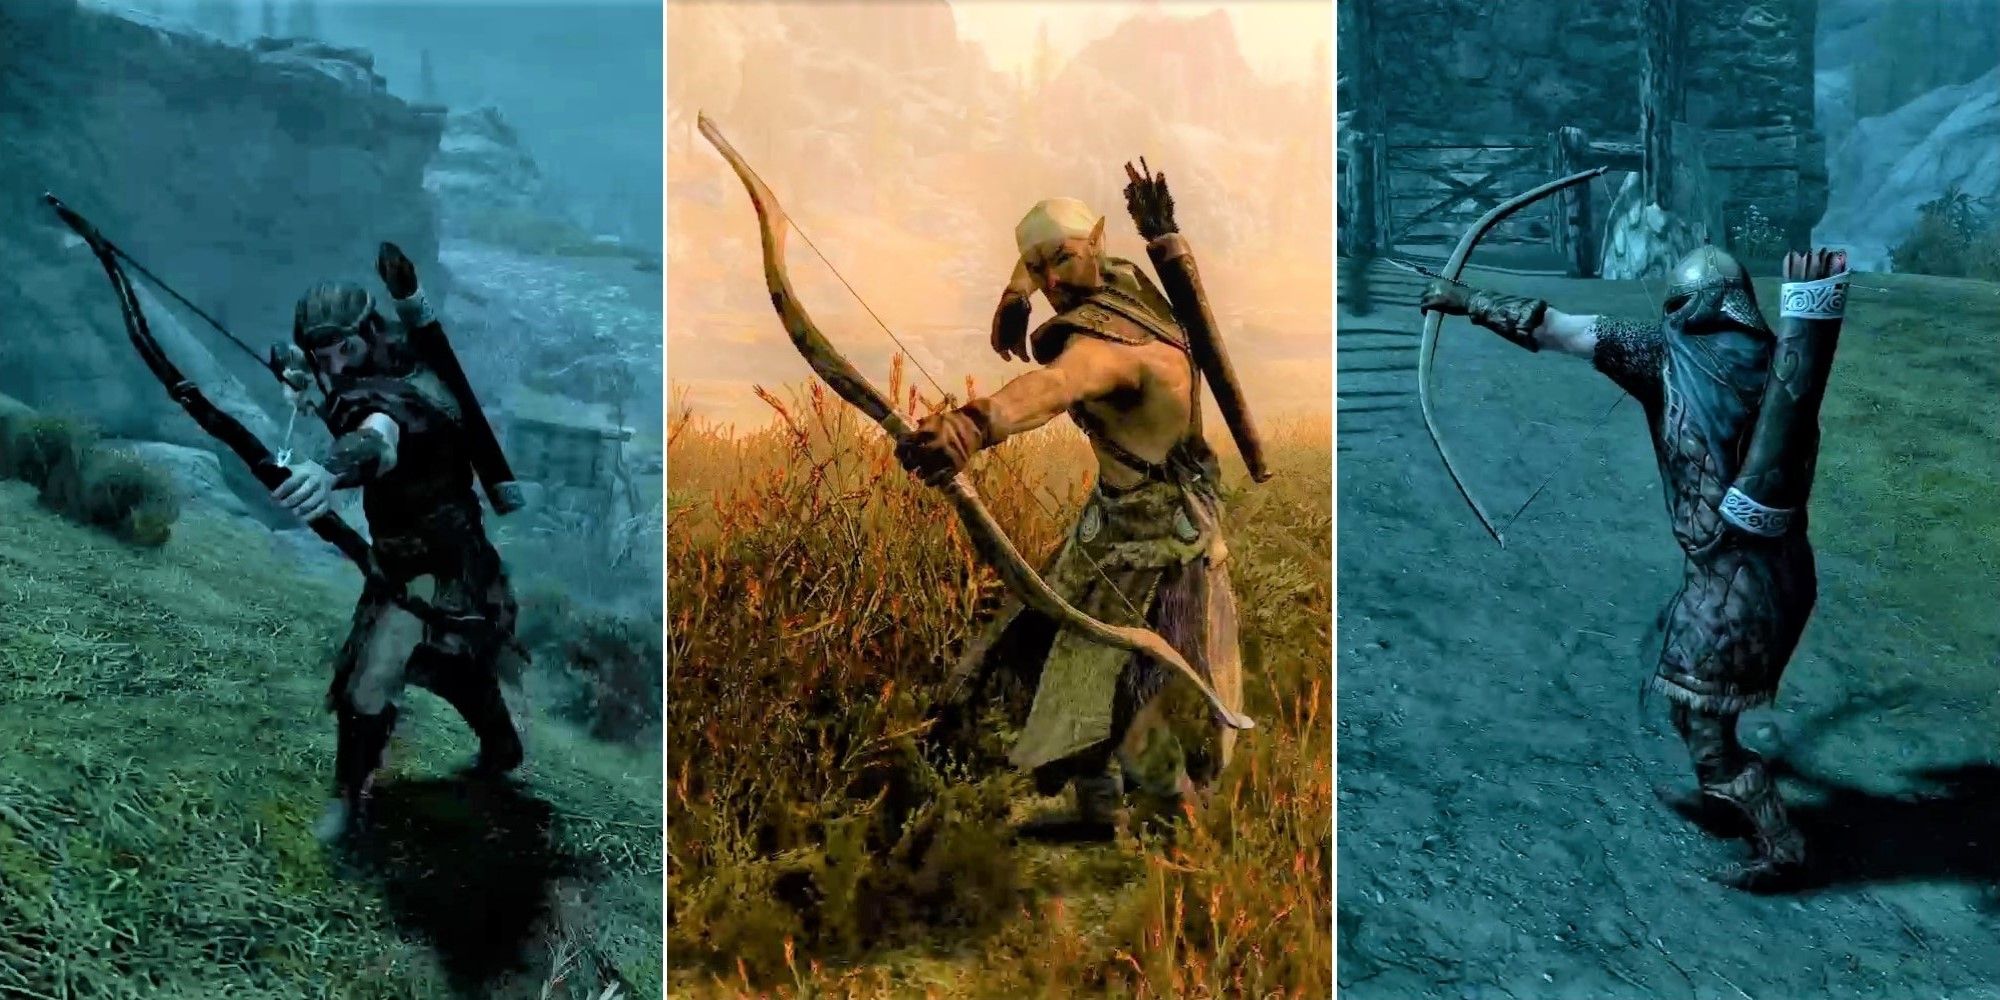 an Imperial archer, an elven hunter, and a Stormcloak archer in Skyrim